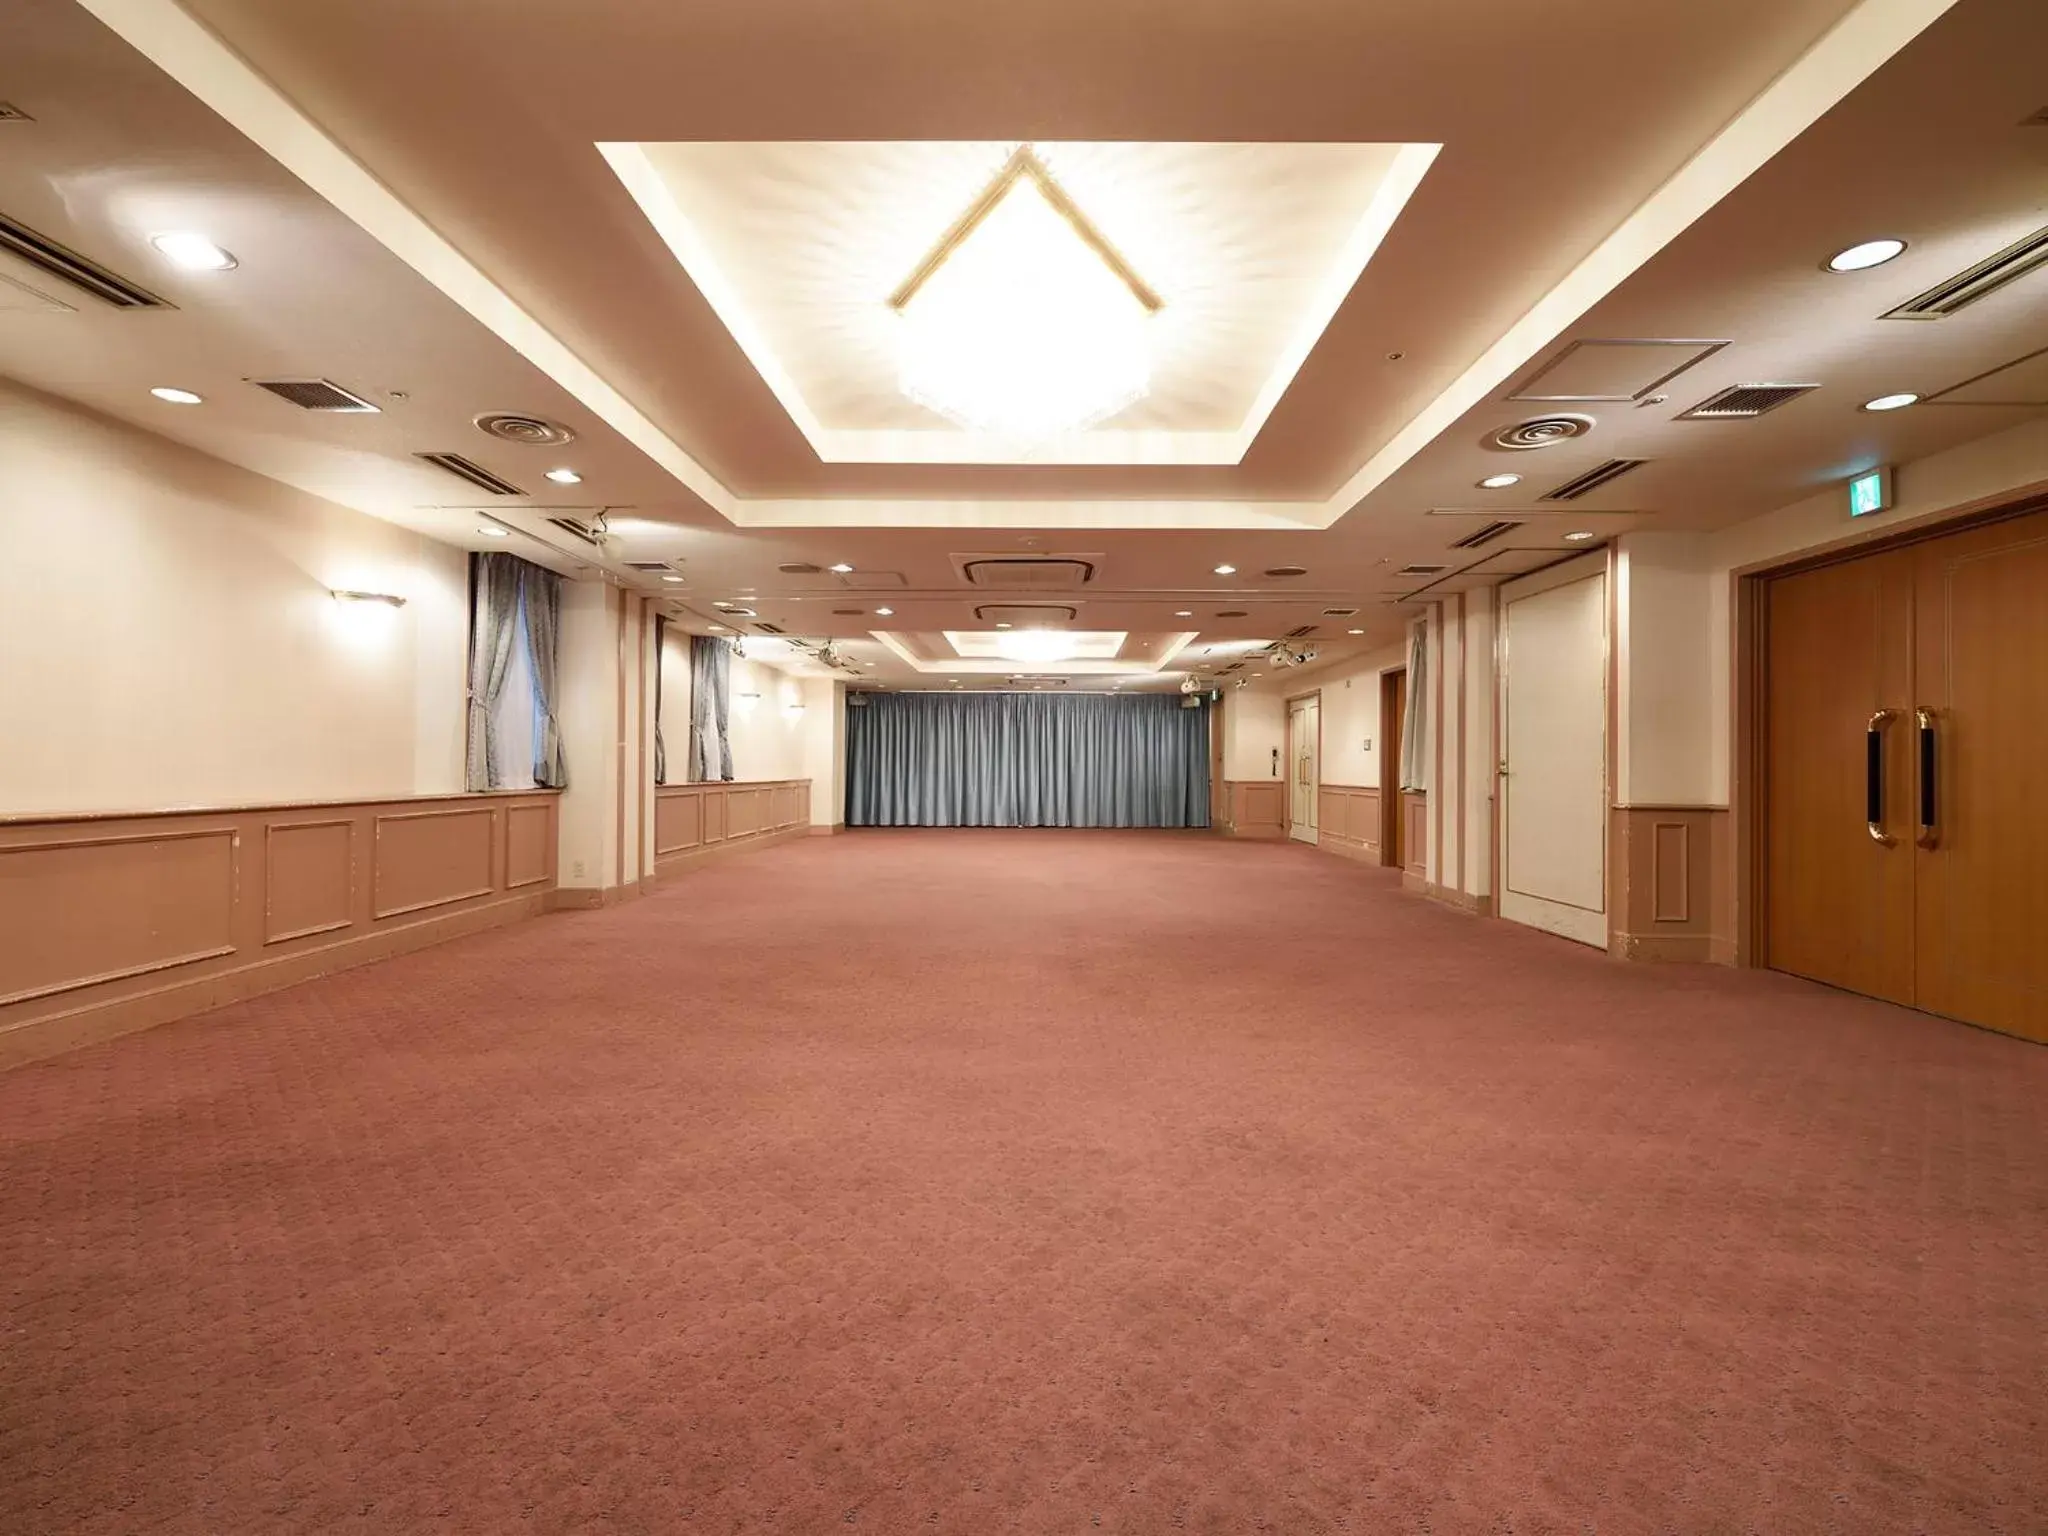 Banquet/Function facilities, Banquet Facilities in Belmont Hotel